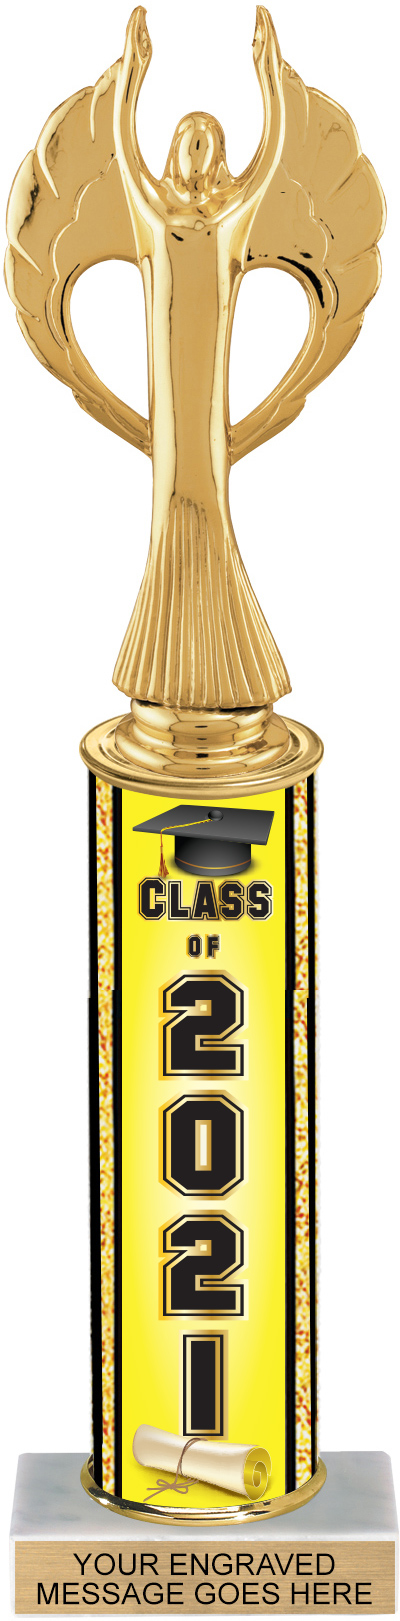 Class of 2021 Trophy - 12 inch